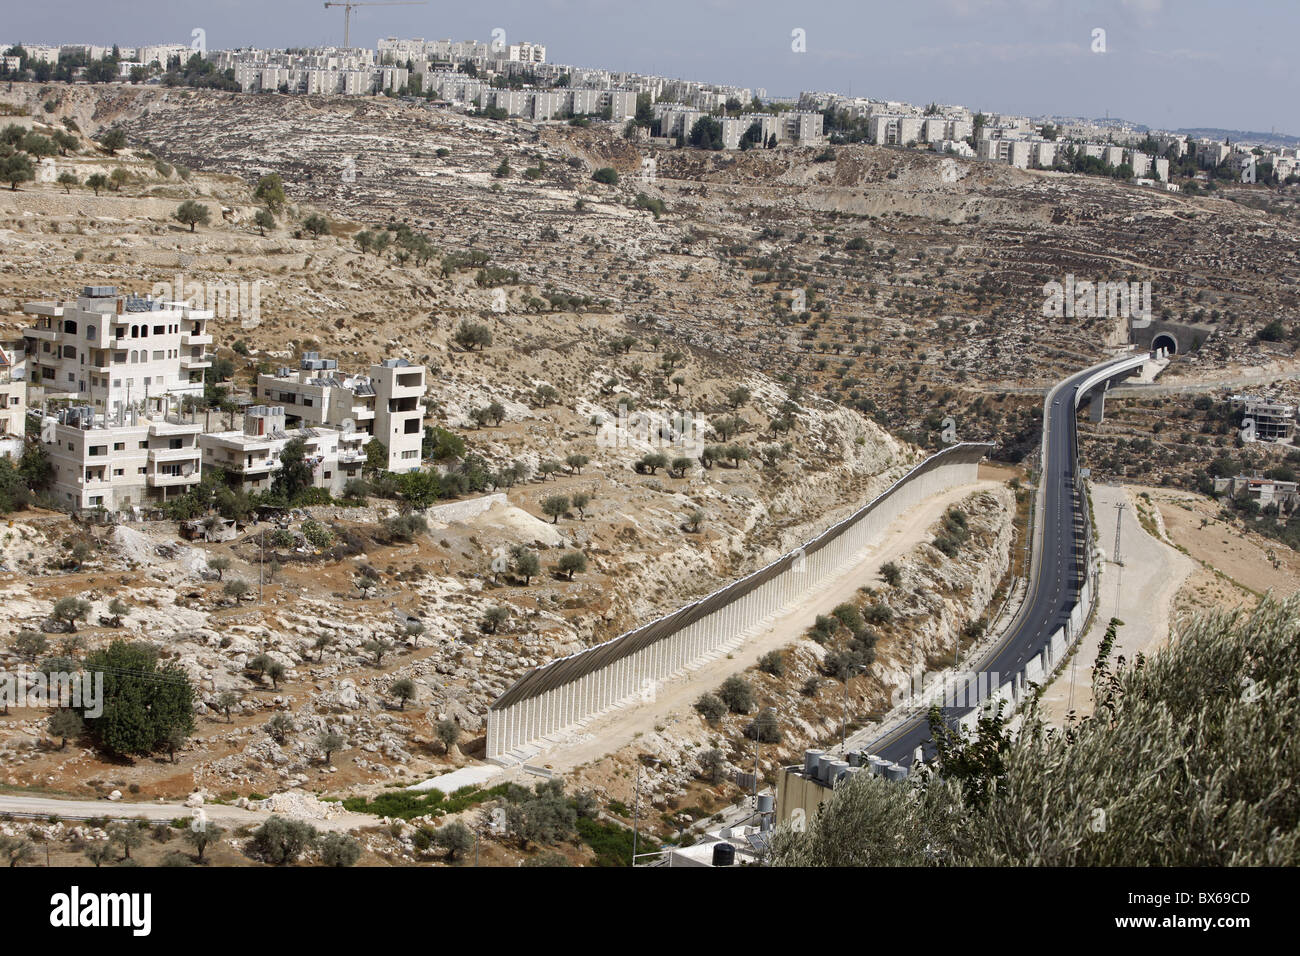 Israeli road in the West Bank, Beit Jala, Palestinian Authority, Israel, Middle East Stock Photo